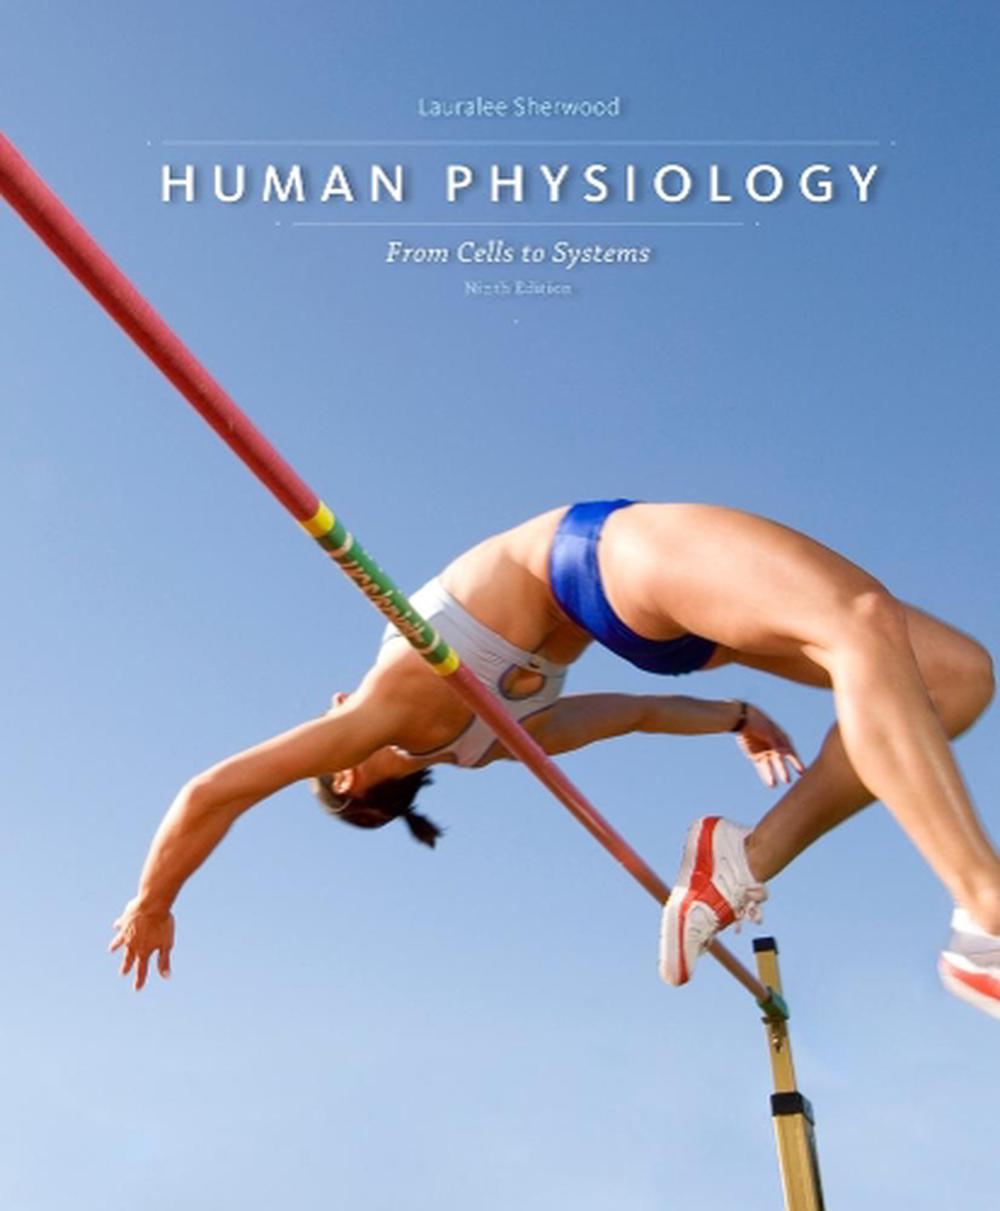 Human Physiology, 9th Edition by Lauralee Sherwood, Hardcover, 9781285866932 Buy online at The